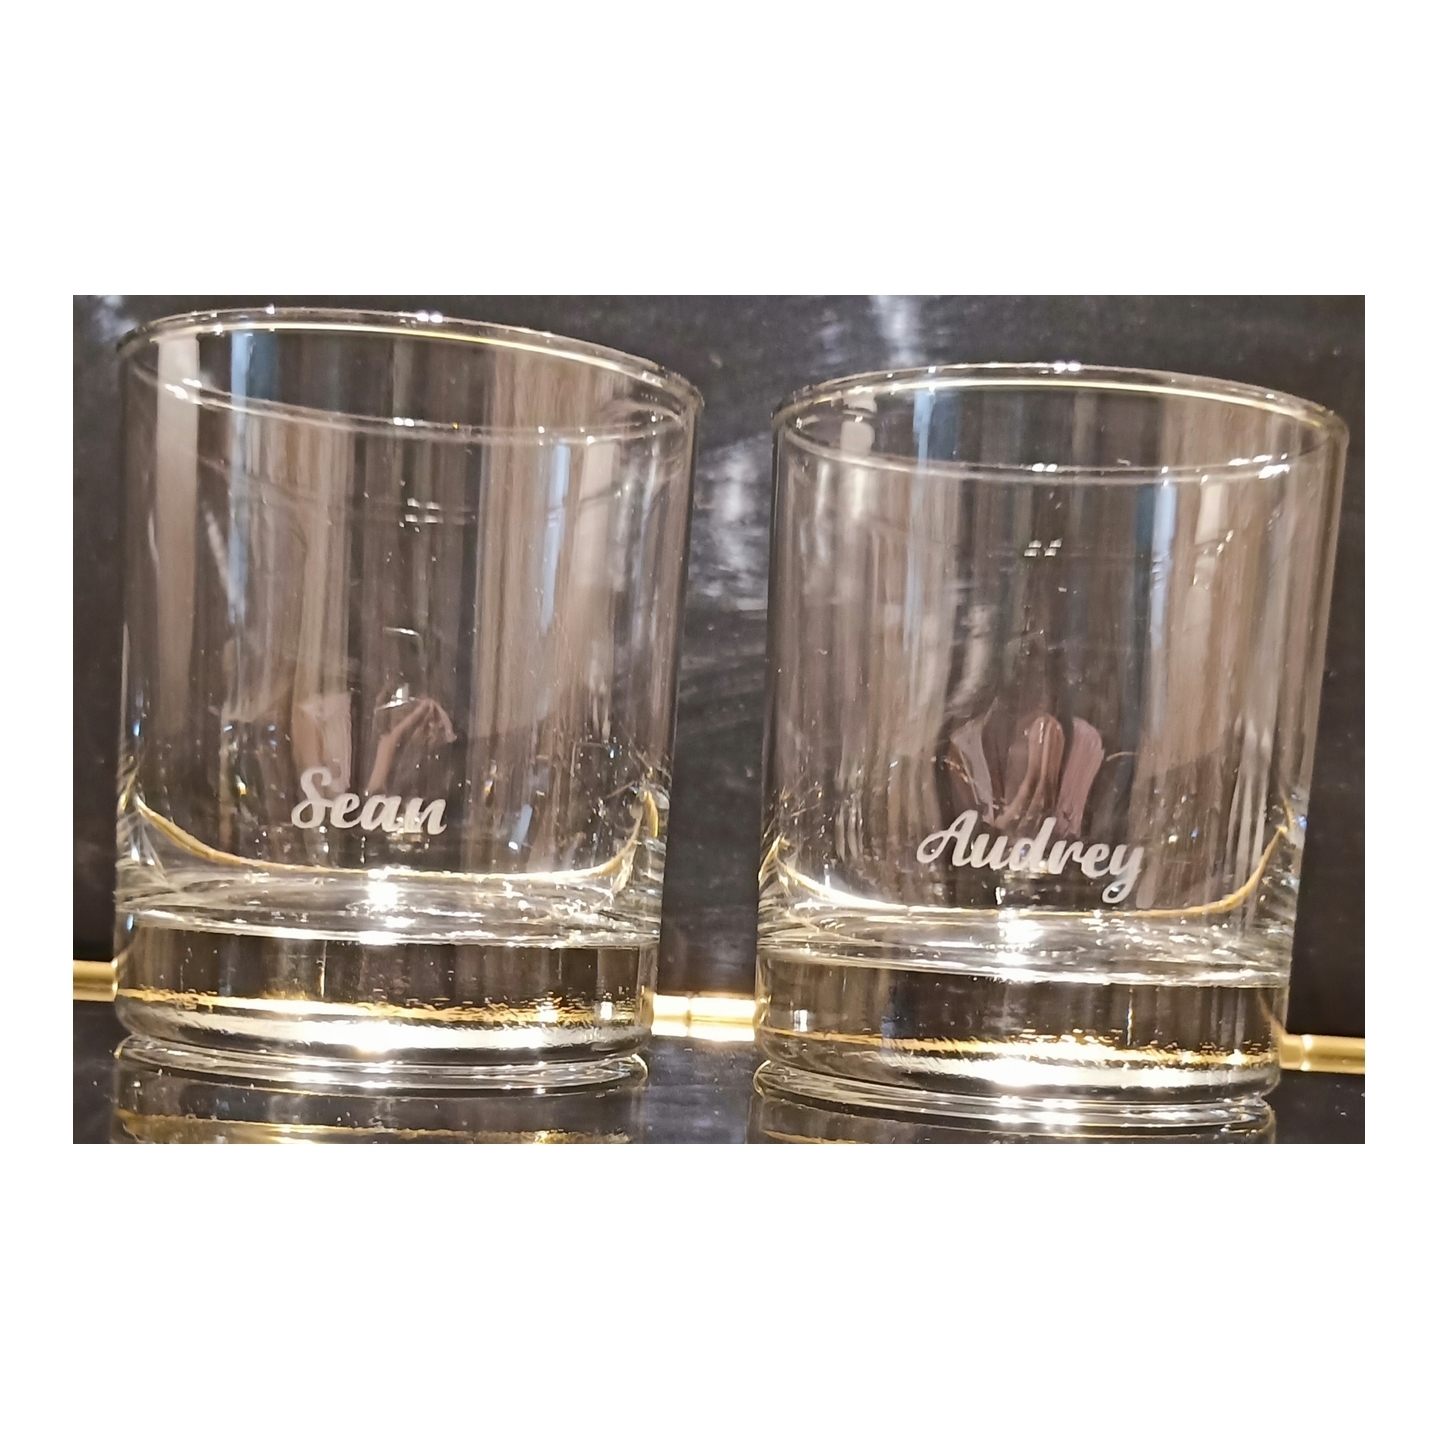 ENGRAVED PERSONALIZED PAIR OF WHISKEY GLASSES SET